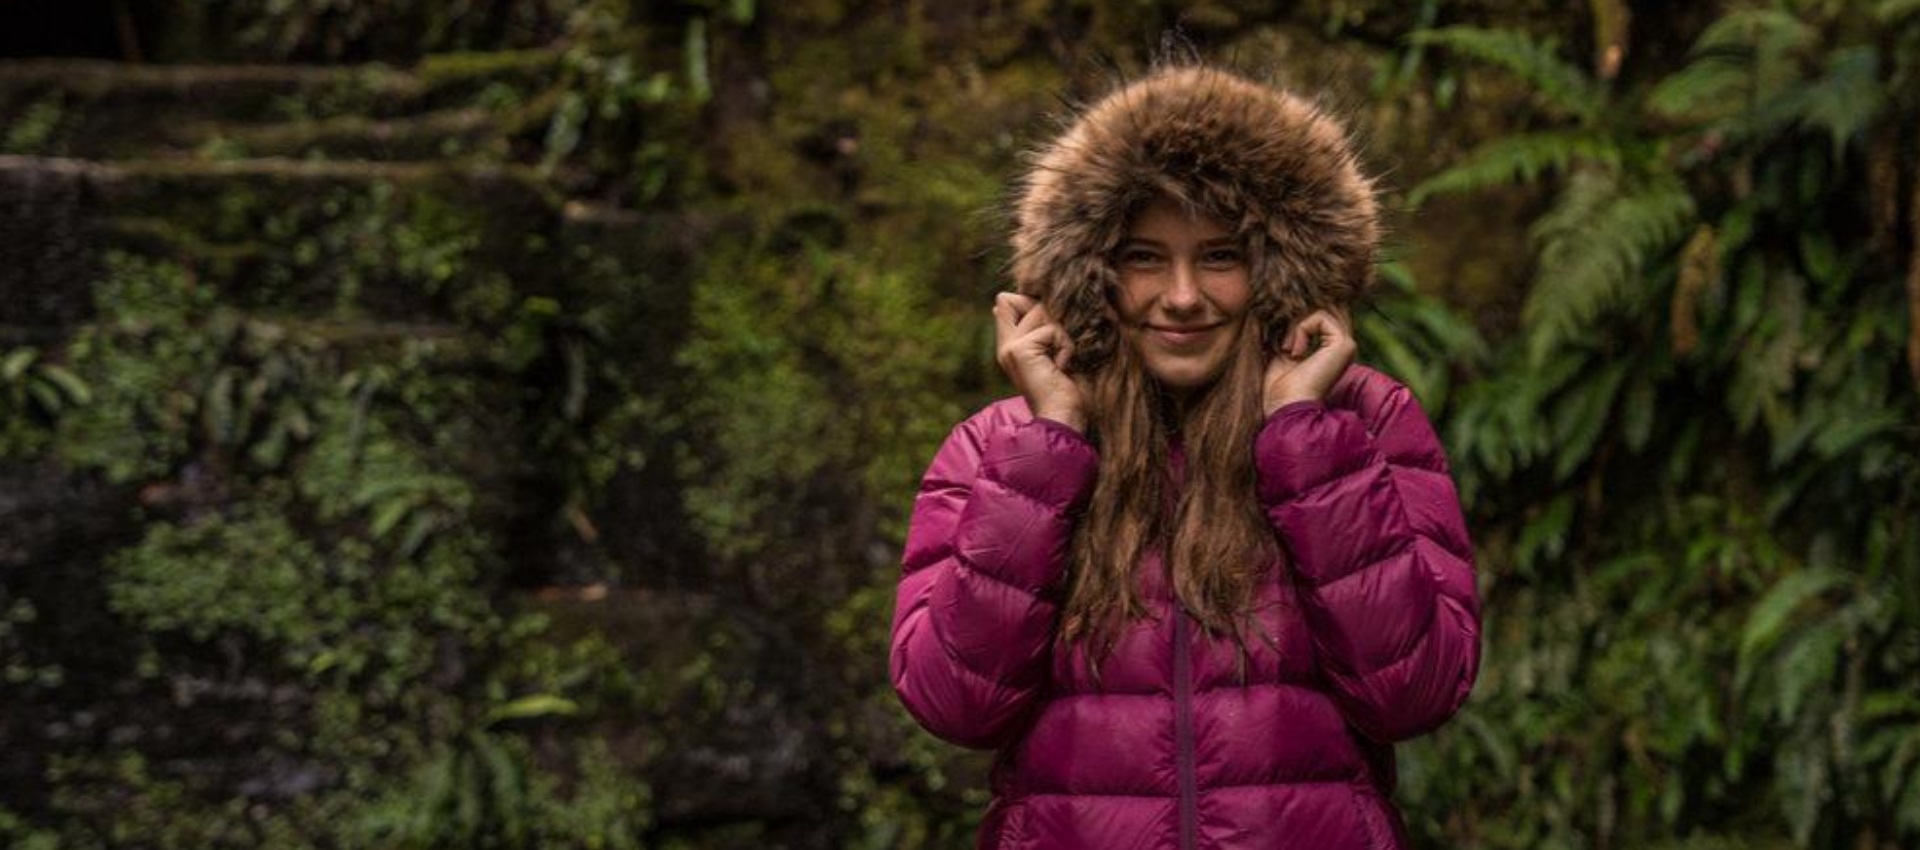 Choosing The Right Jacket For Humid & Not So Cold Weather